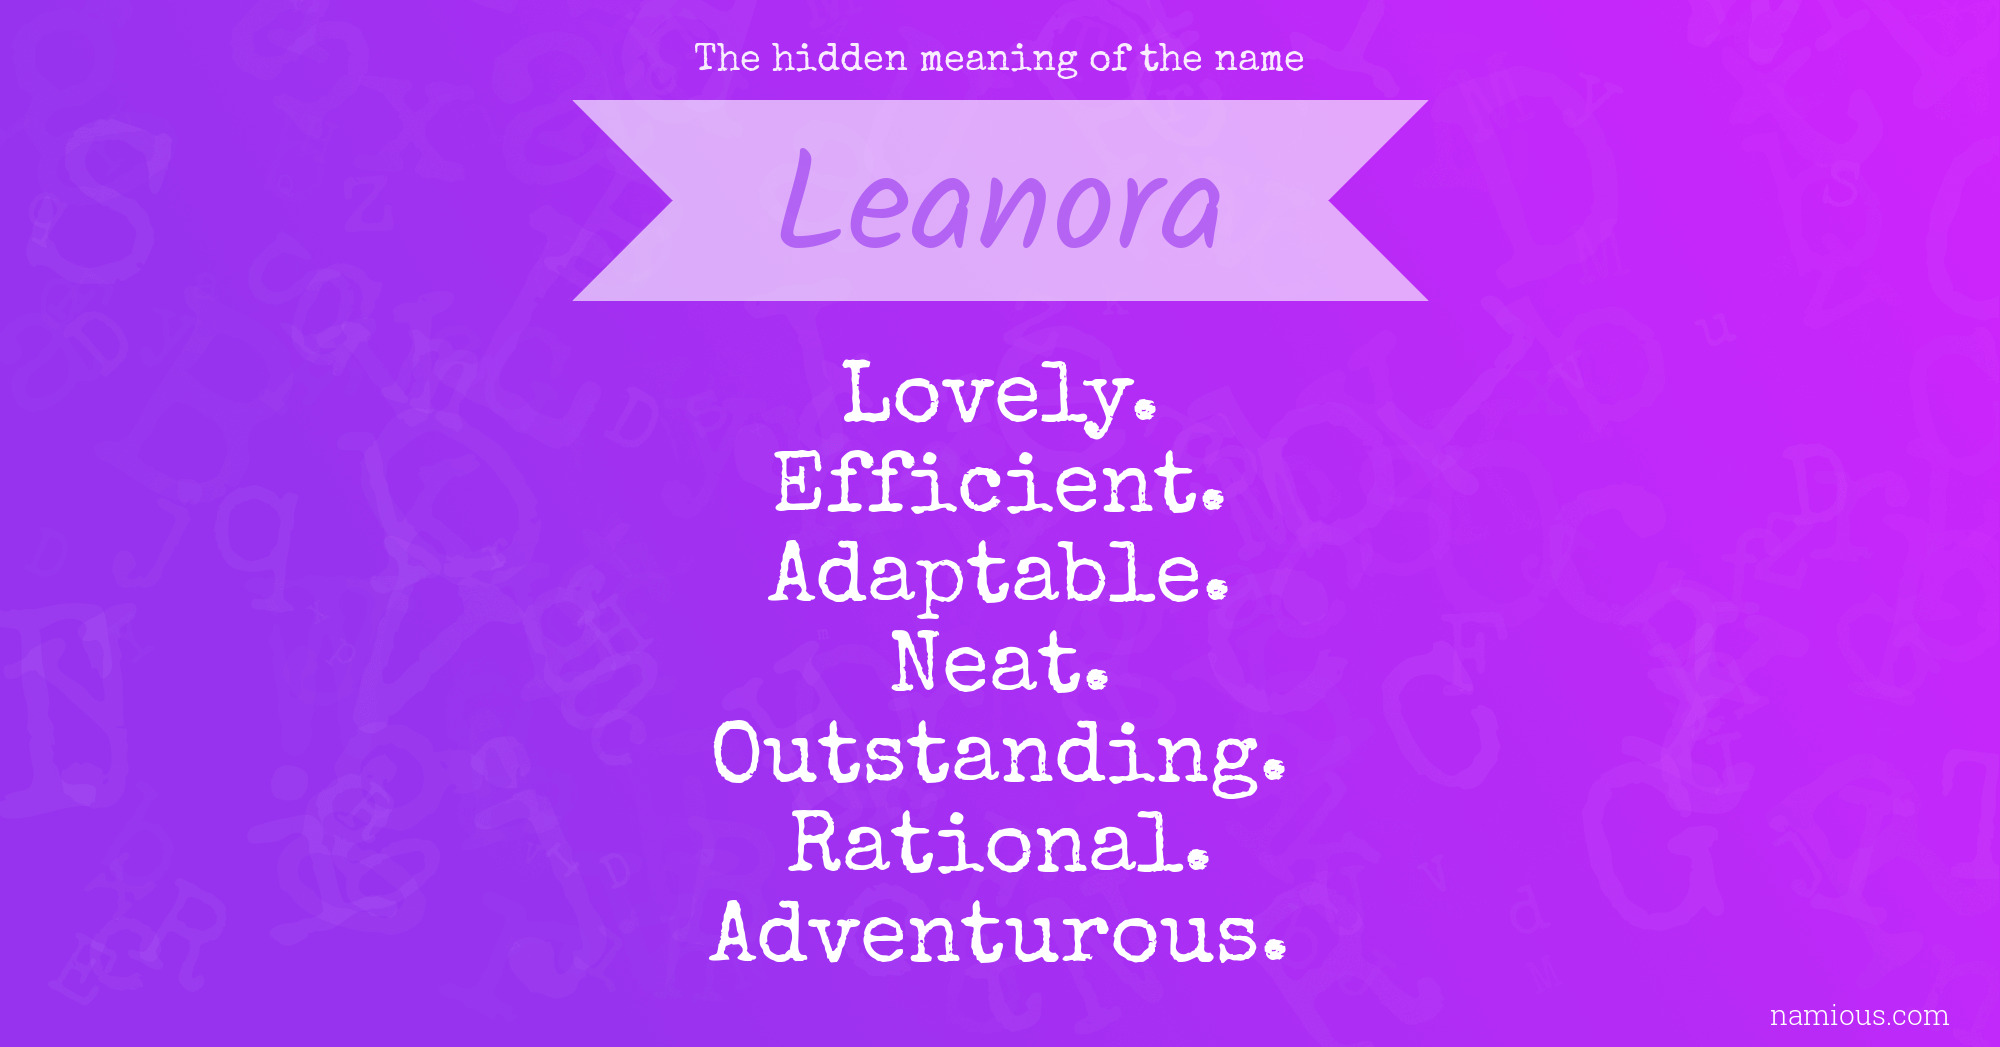 The hidden meaning of the name Leanora